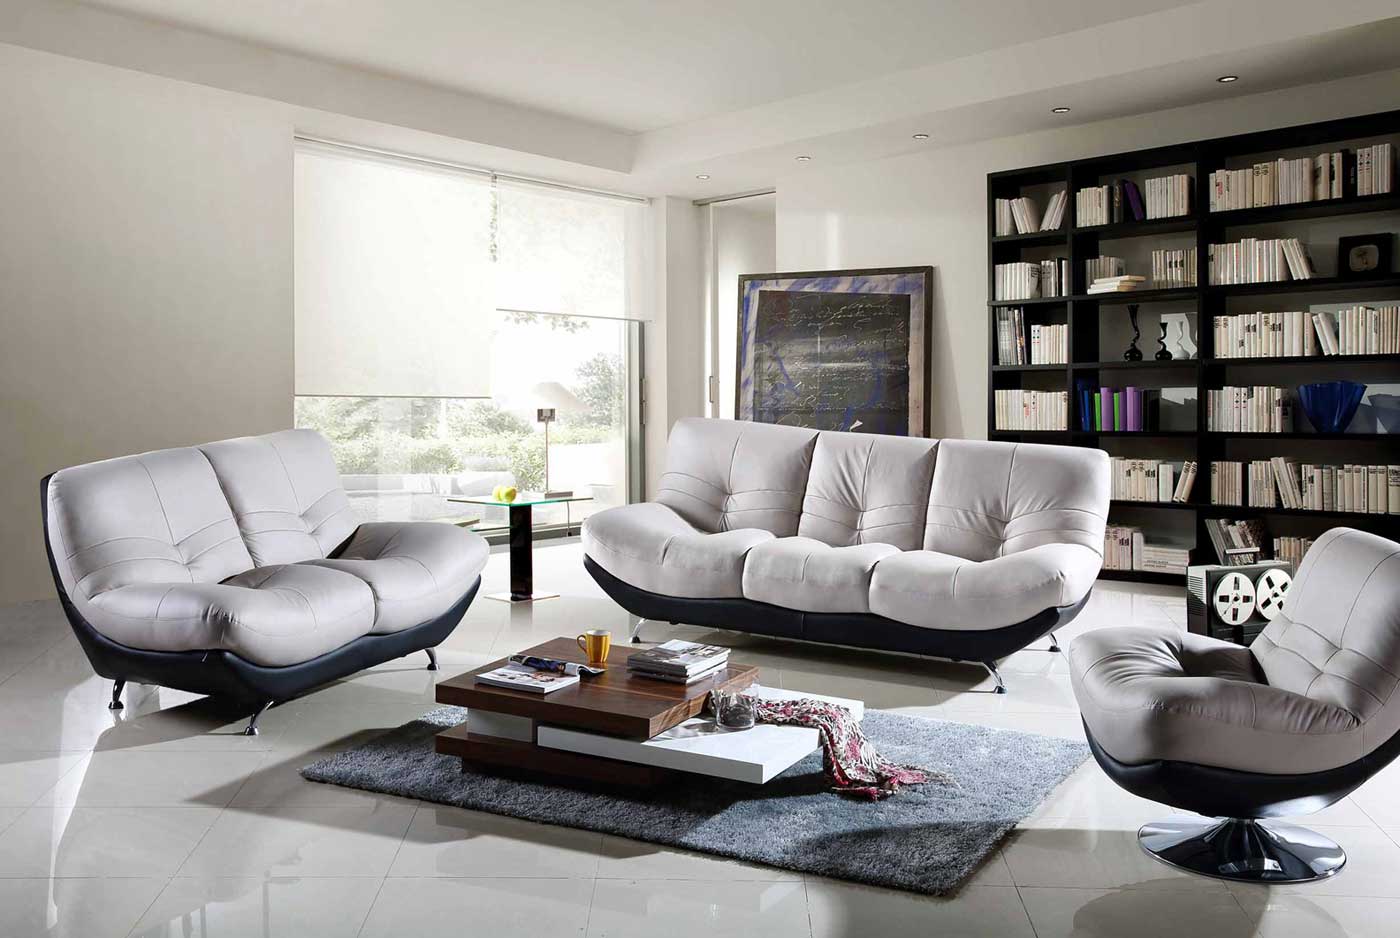 White Themed Sets Modern White Themed Living Room Sets Decor For Small Living Rooms Design Ideas With Easy On The Eye Sofa Bed Couch Design And Charming Gray Feather Carpet Idea Also Simple White Ceramic Flooring Living Room Beautiful Living Room Sets As Suitable Furniture